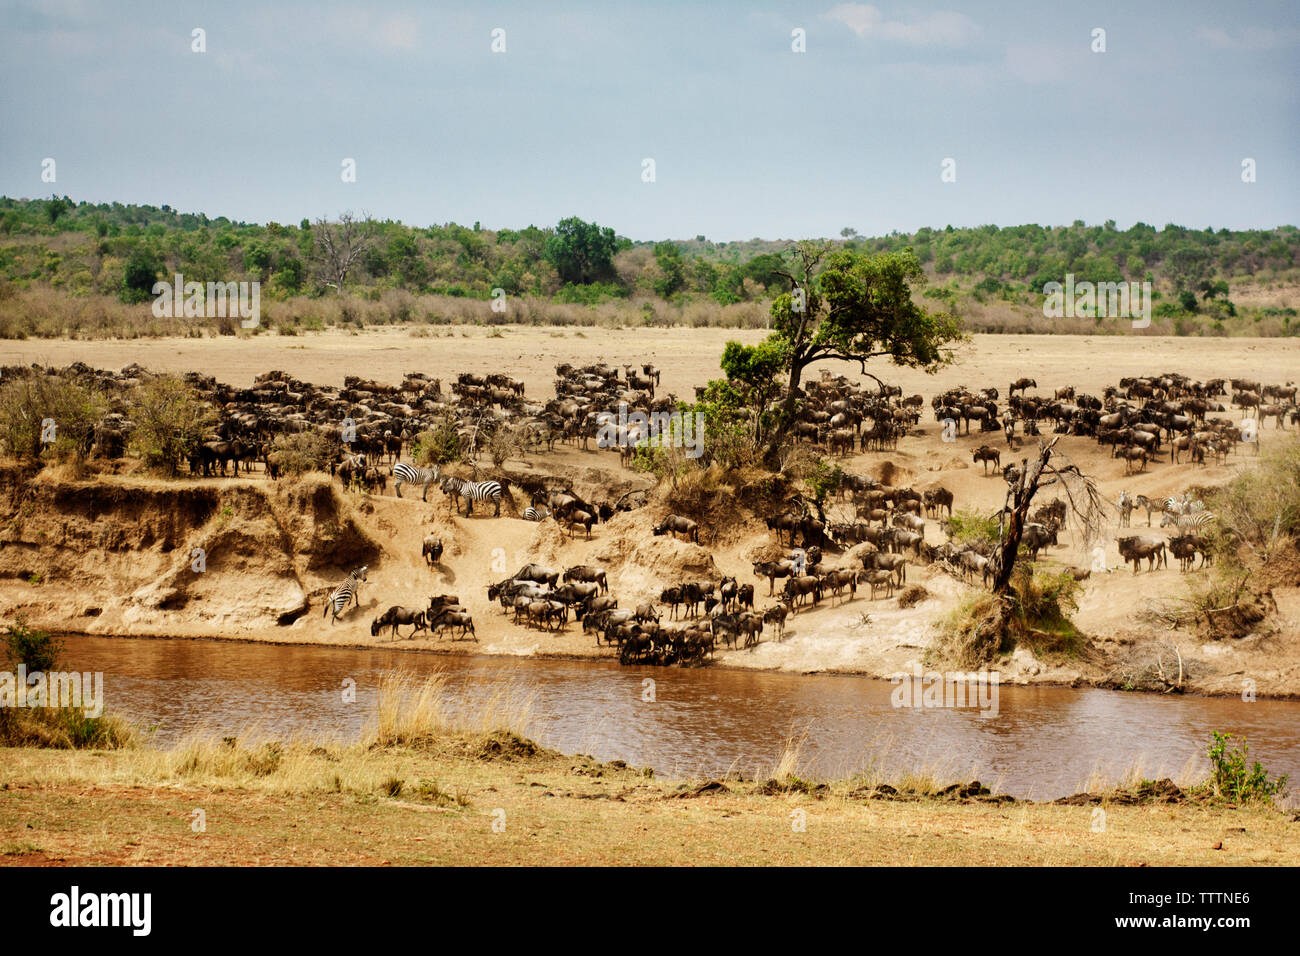 Zebras and wildebeests on field Stock Photo